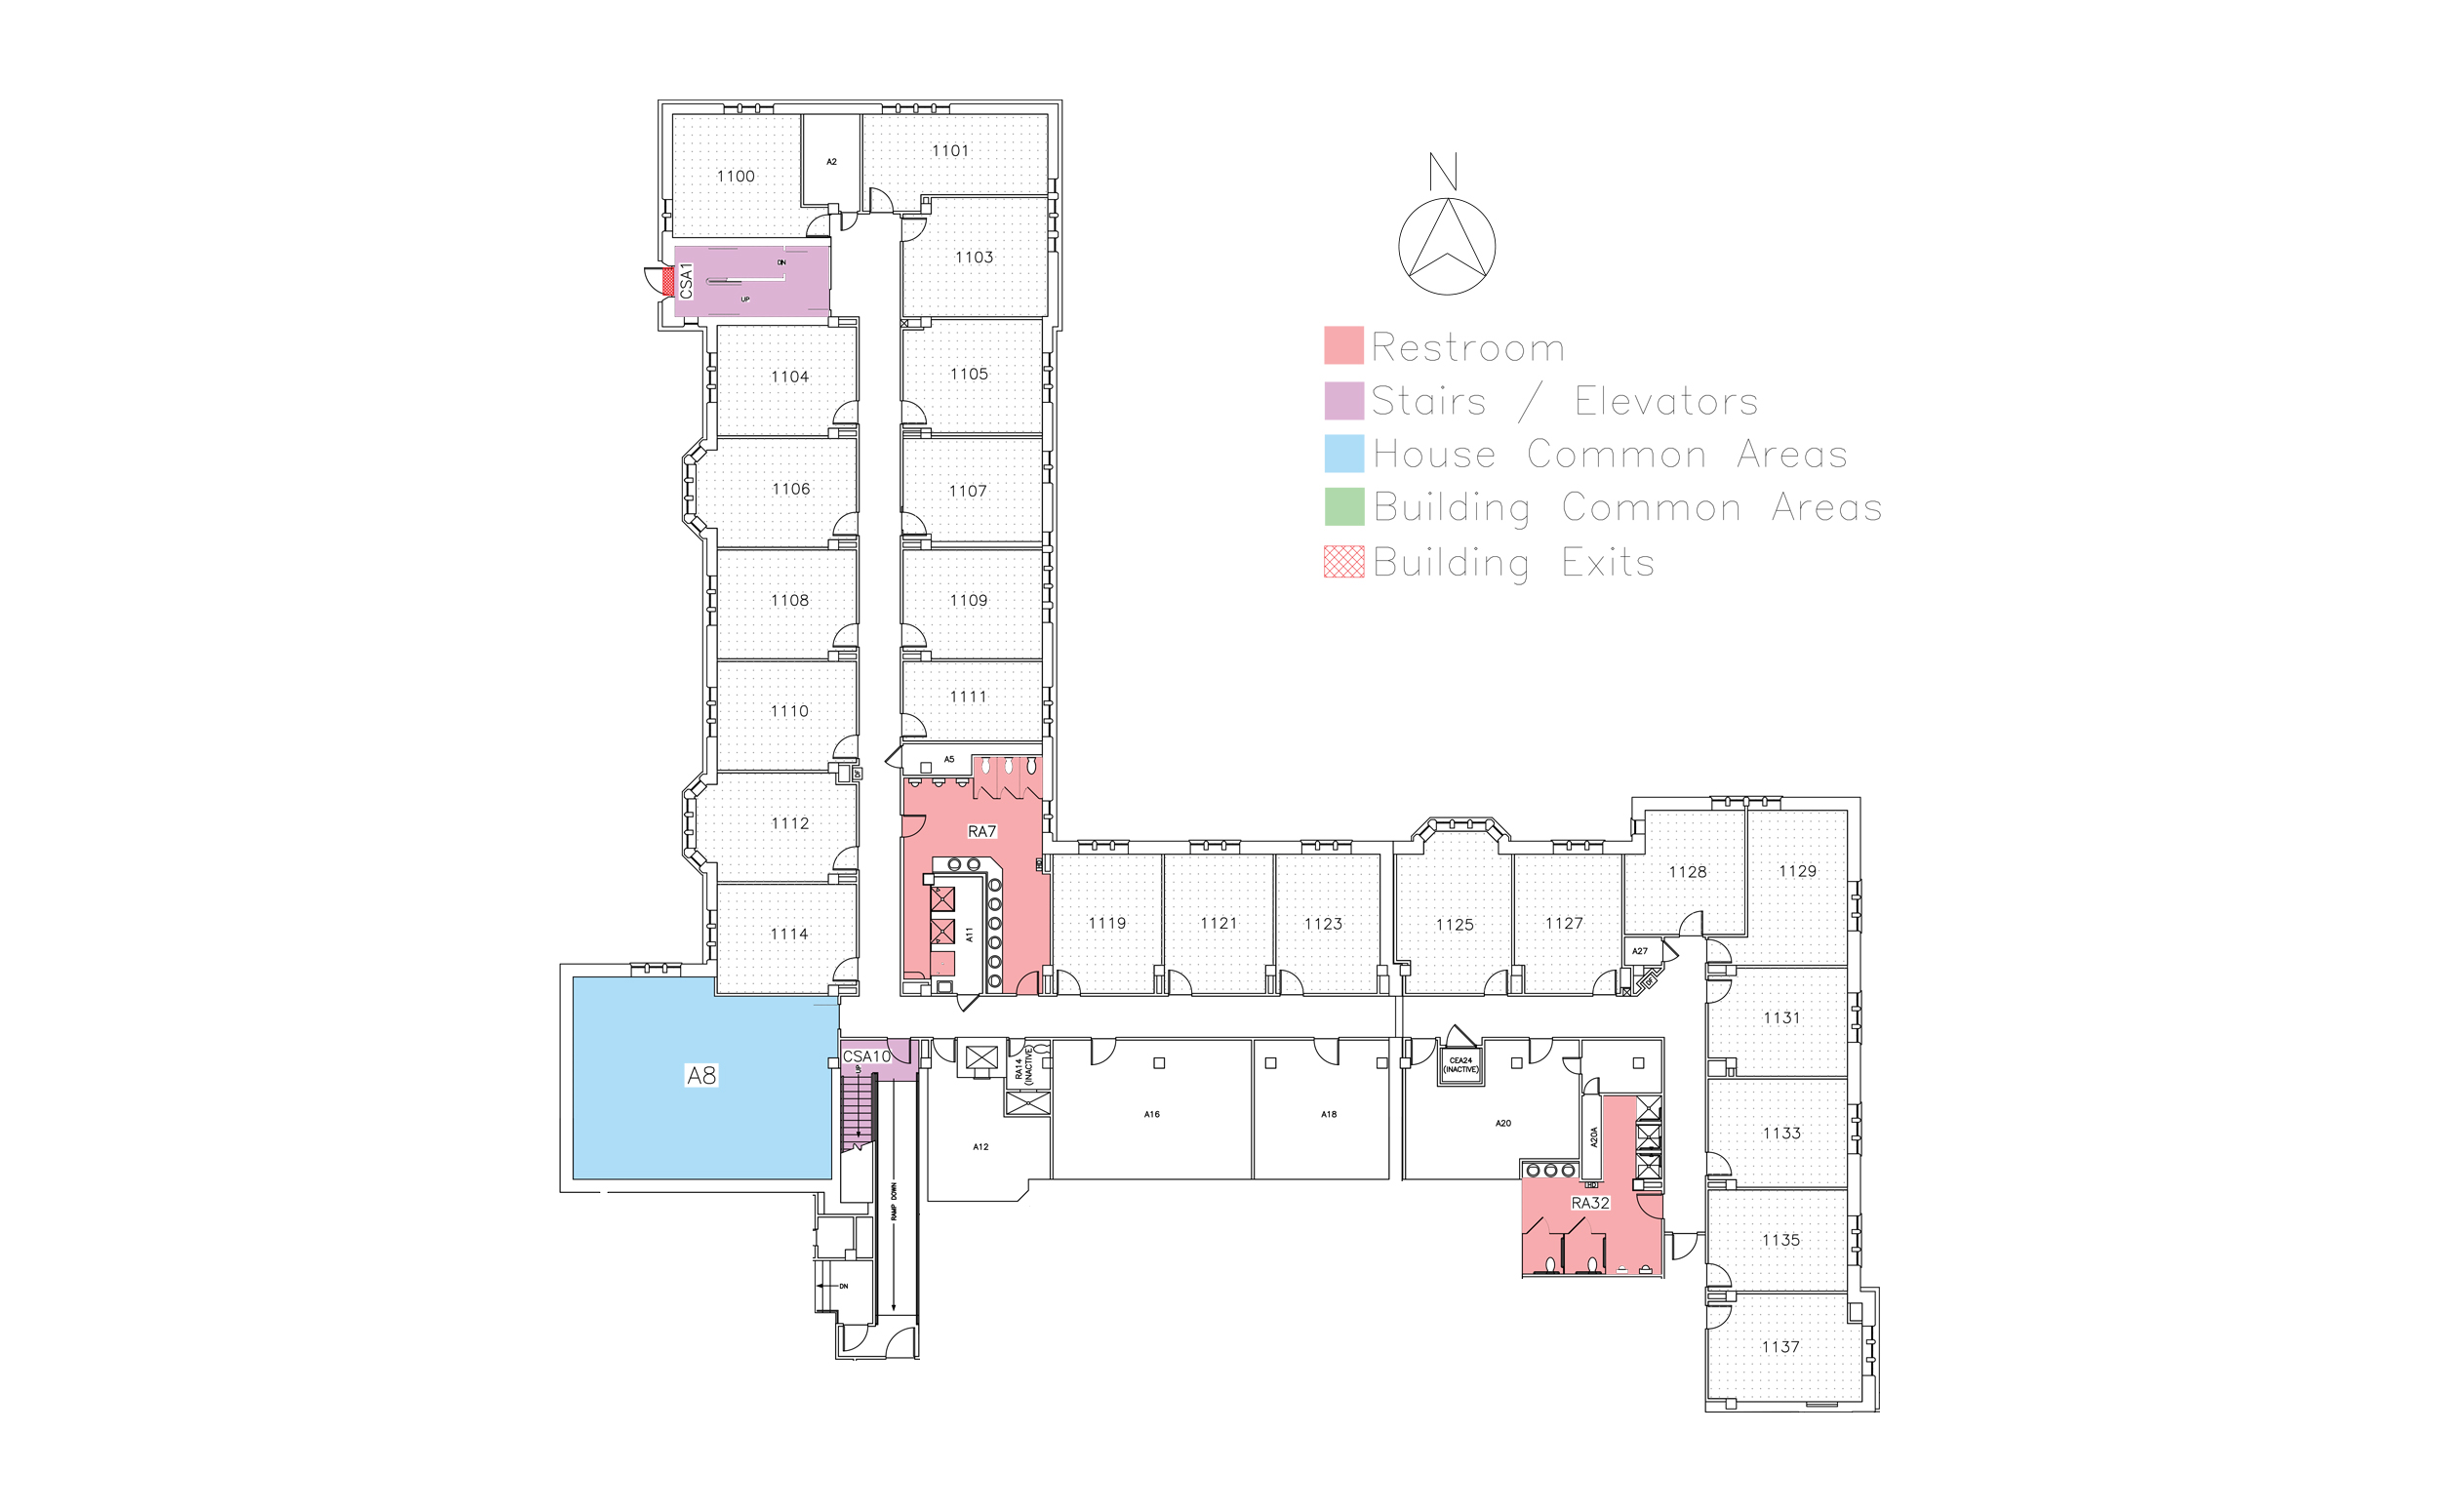 Stange House, first floor in Friley Hall floor plan. Identifies the location of rooms, bathrooms and common space.